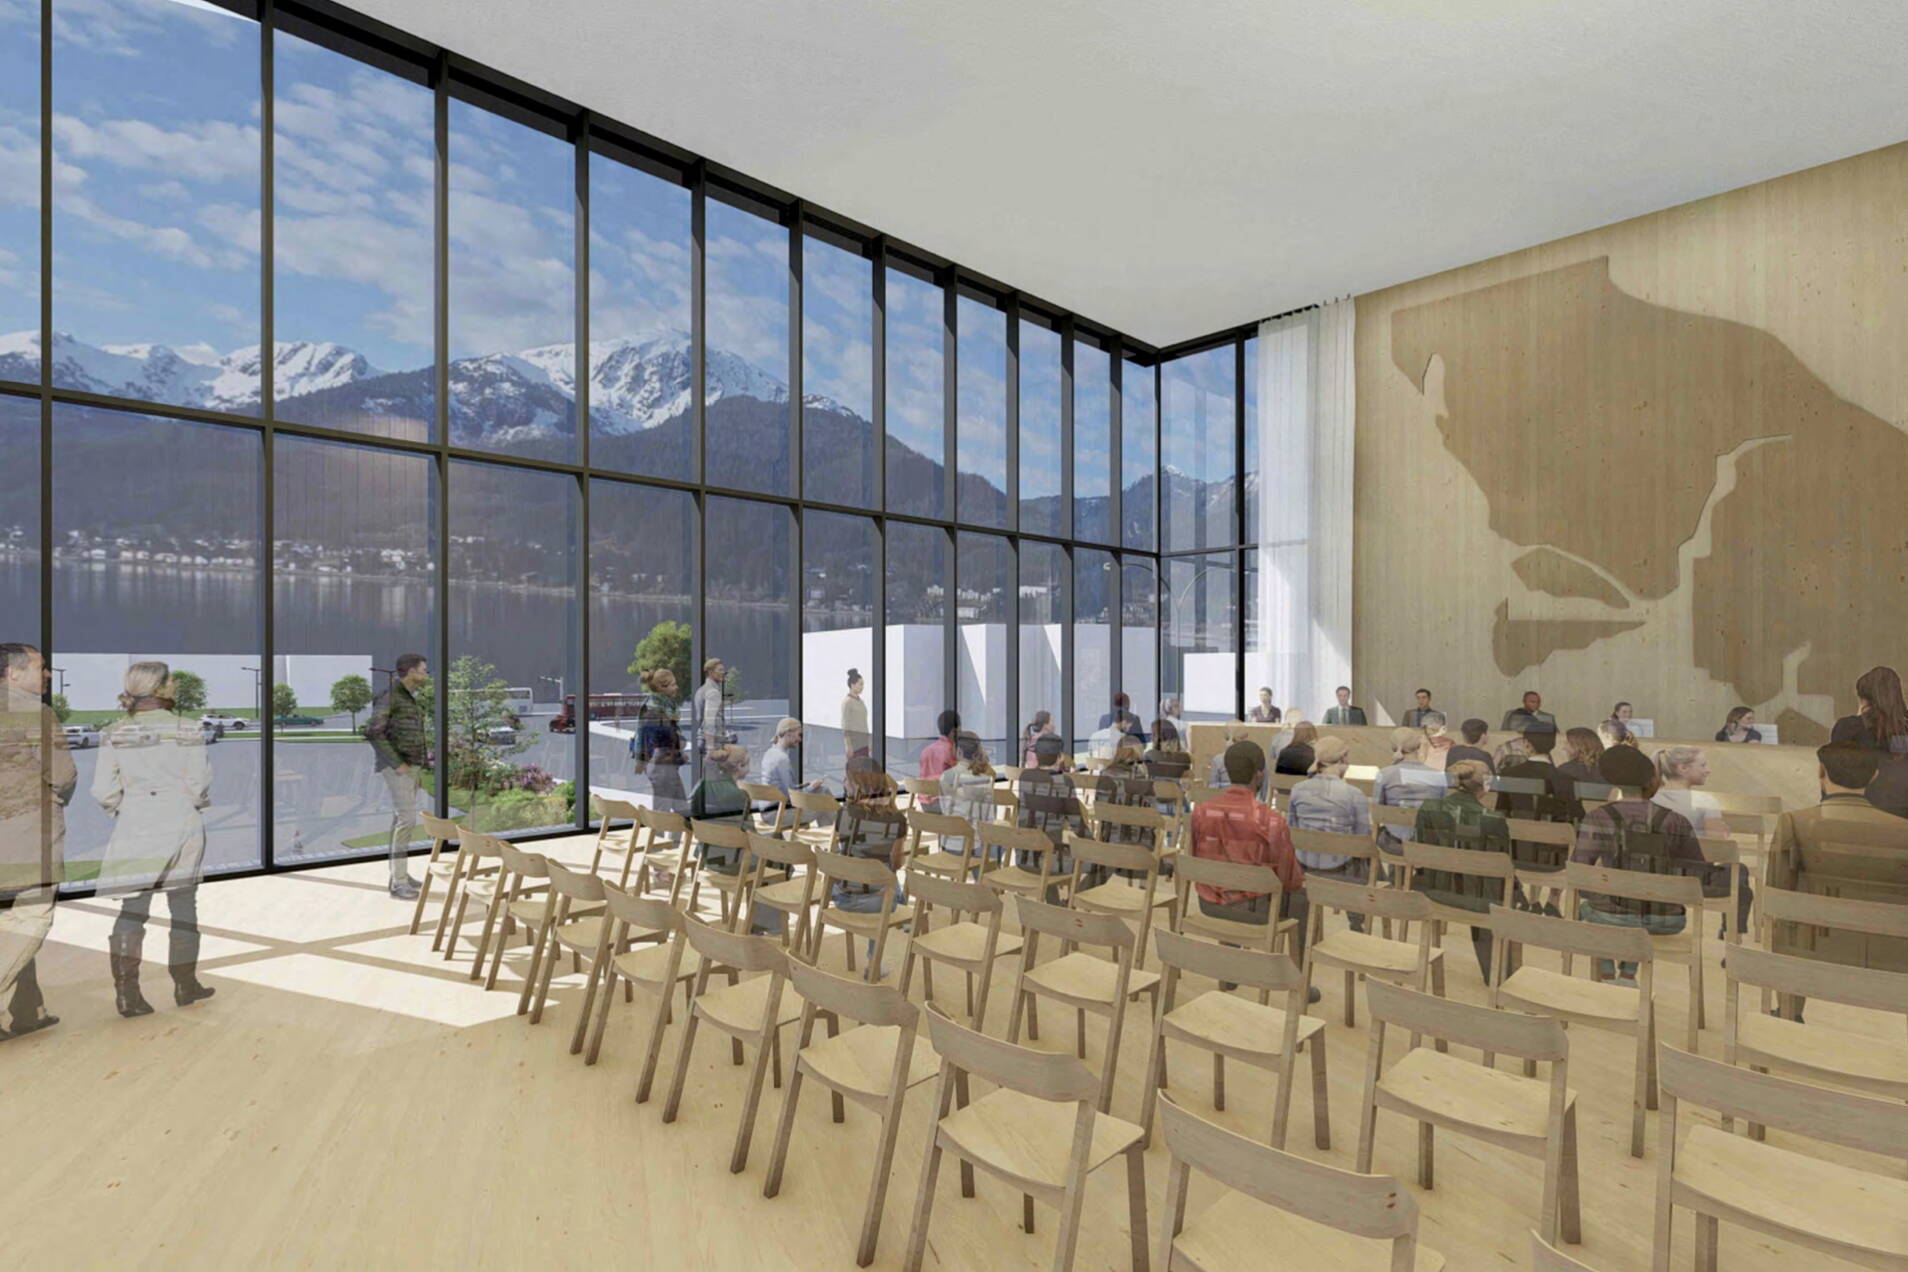 SRS Architecture 
An artist’s depiction shows the public meeting space for a proposed new city hall in Juneau. The Juneau Assembly is scheduled to vote Monday on allocating $6.3 million in general funds toward the project expected to cost roughly $40 million, accepting public testimony beforehand. The Assembly is also scheduled to take final votes on other major items including next year’s budget and property tax mill rate.